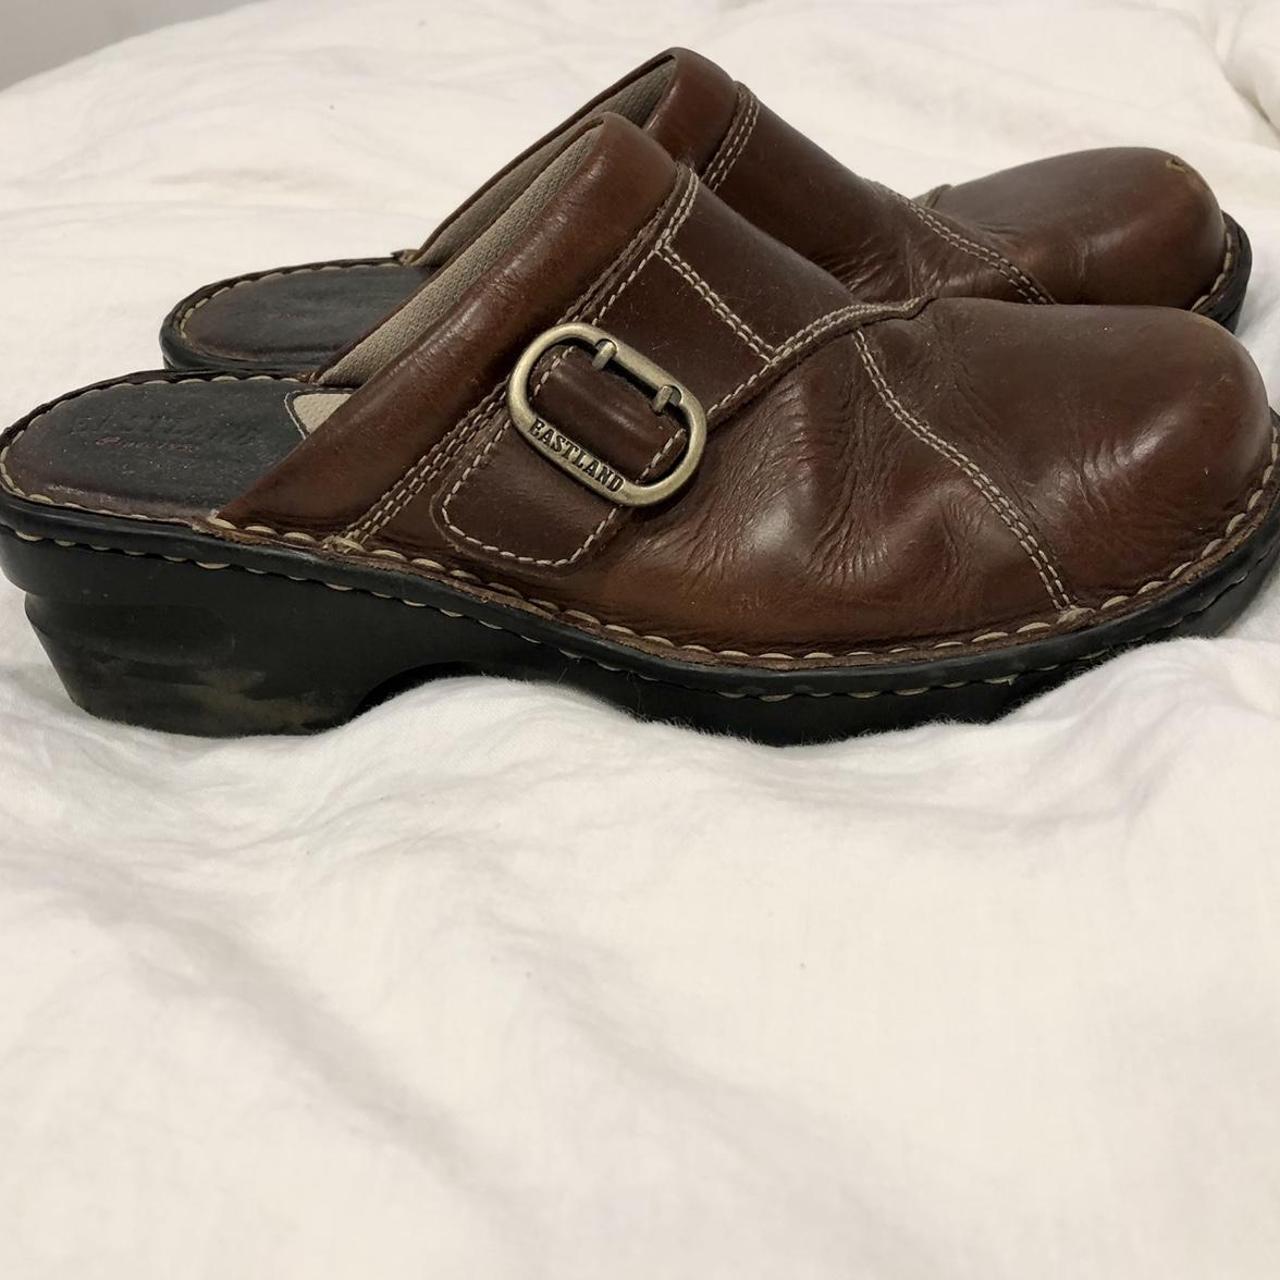 Product Image 2 - Brown Eastland clogs, scuffs pictured.